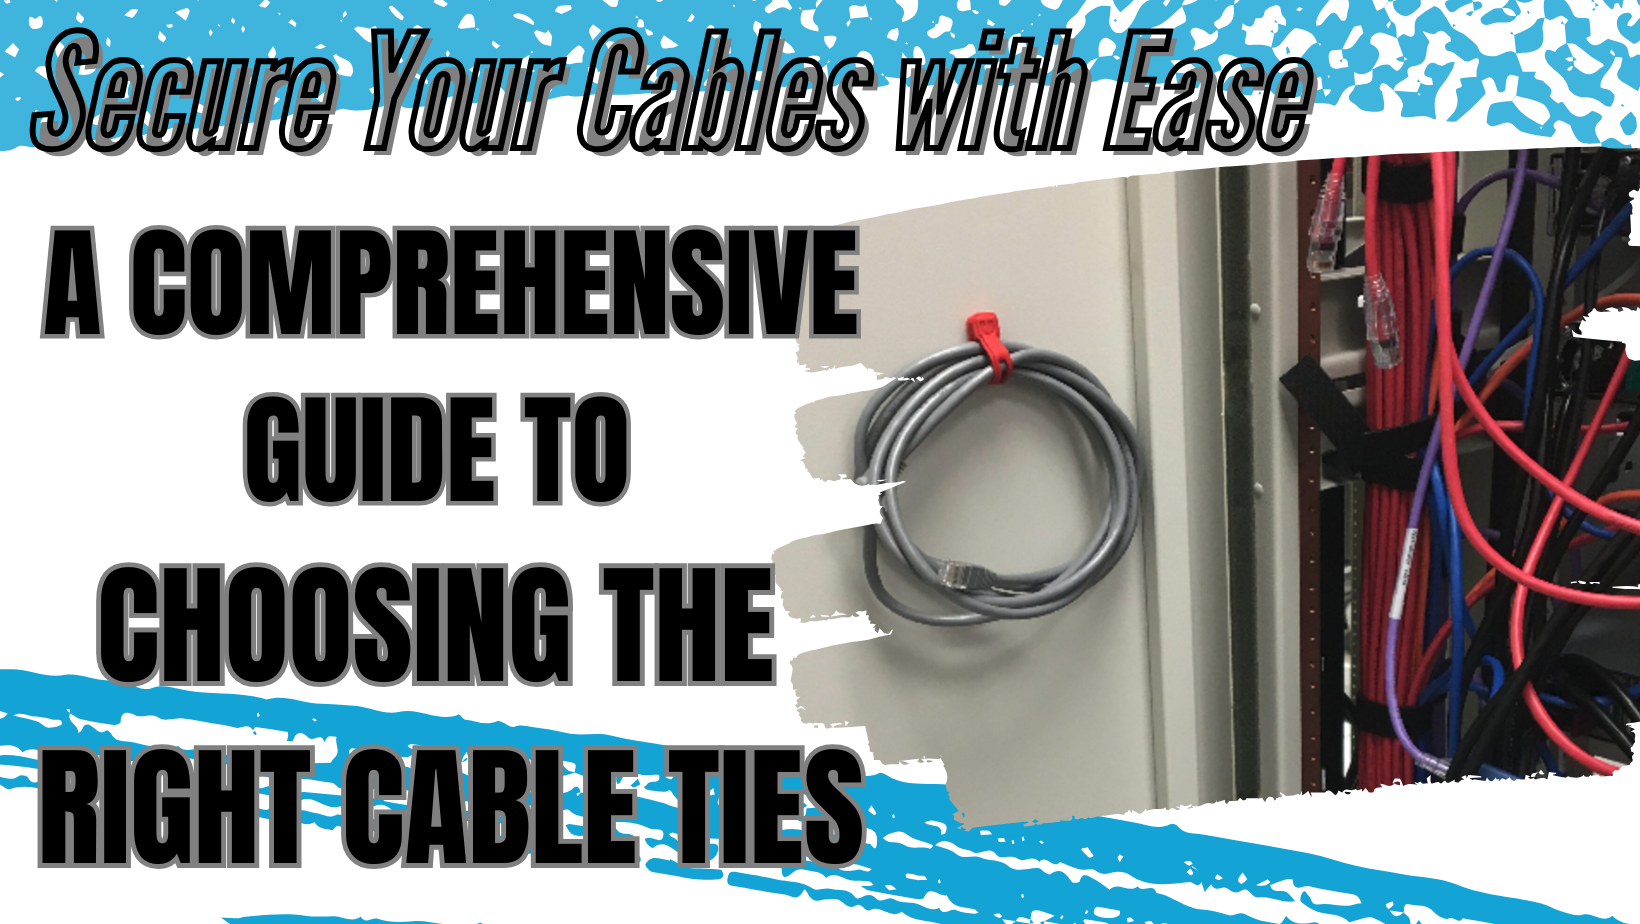 Secure Your Cables with Ease: A Comprehensive Guide to Choosing the Right Cable Ties